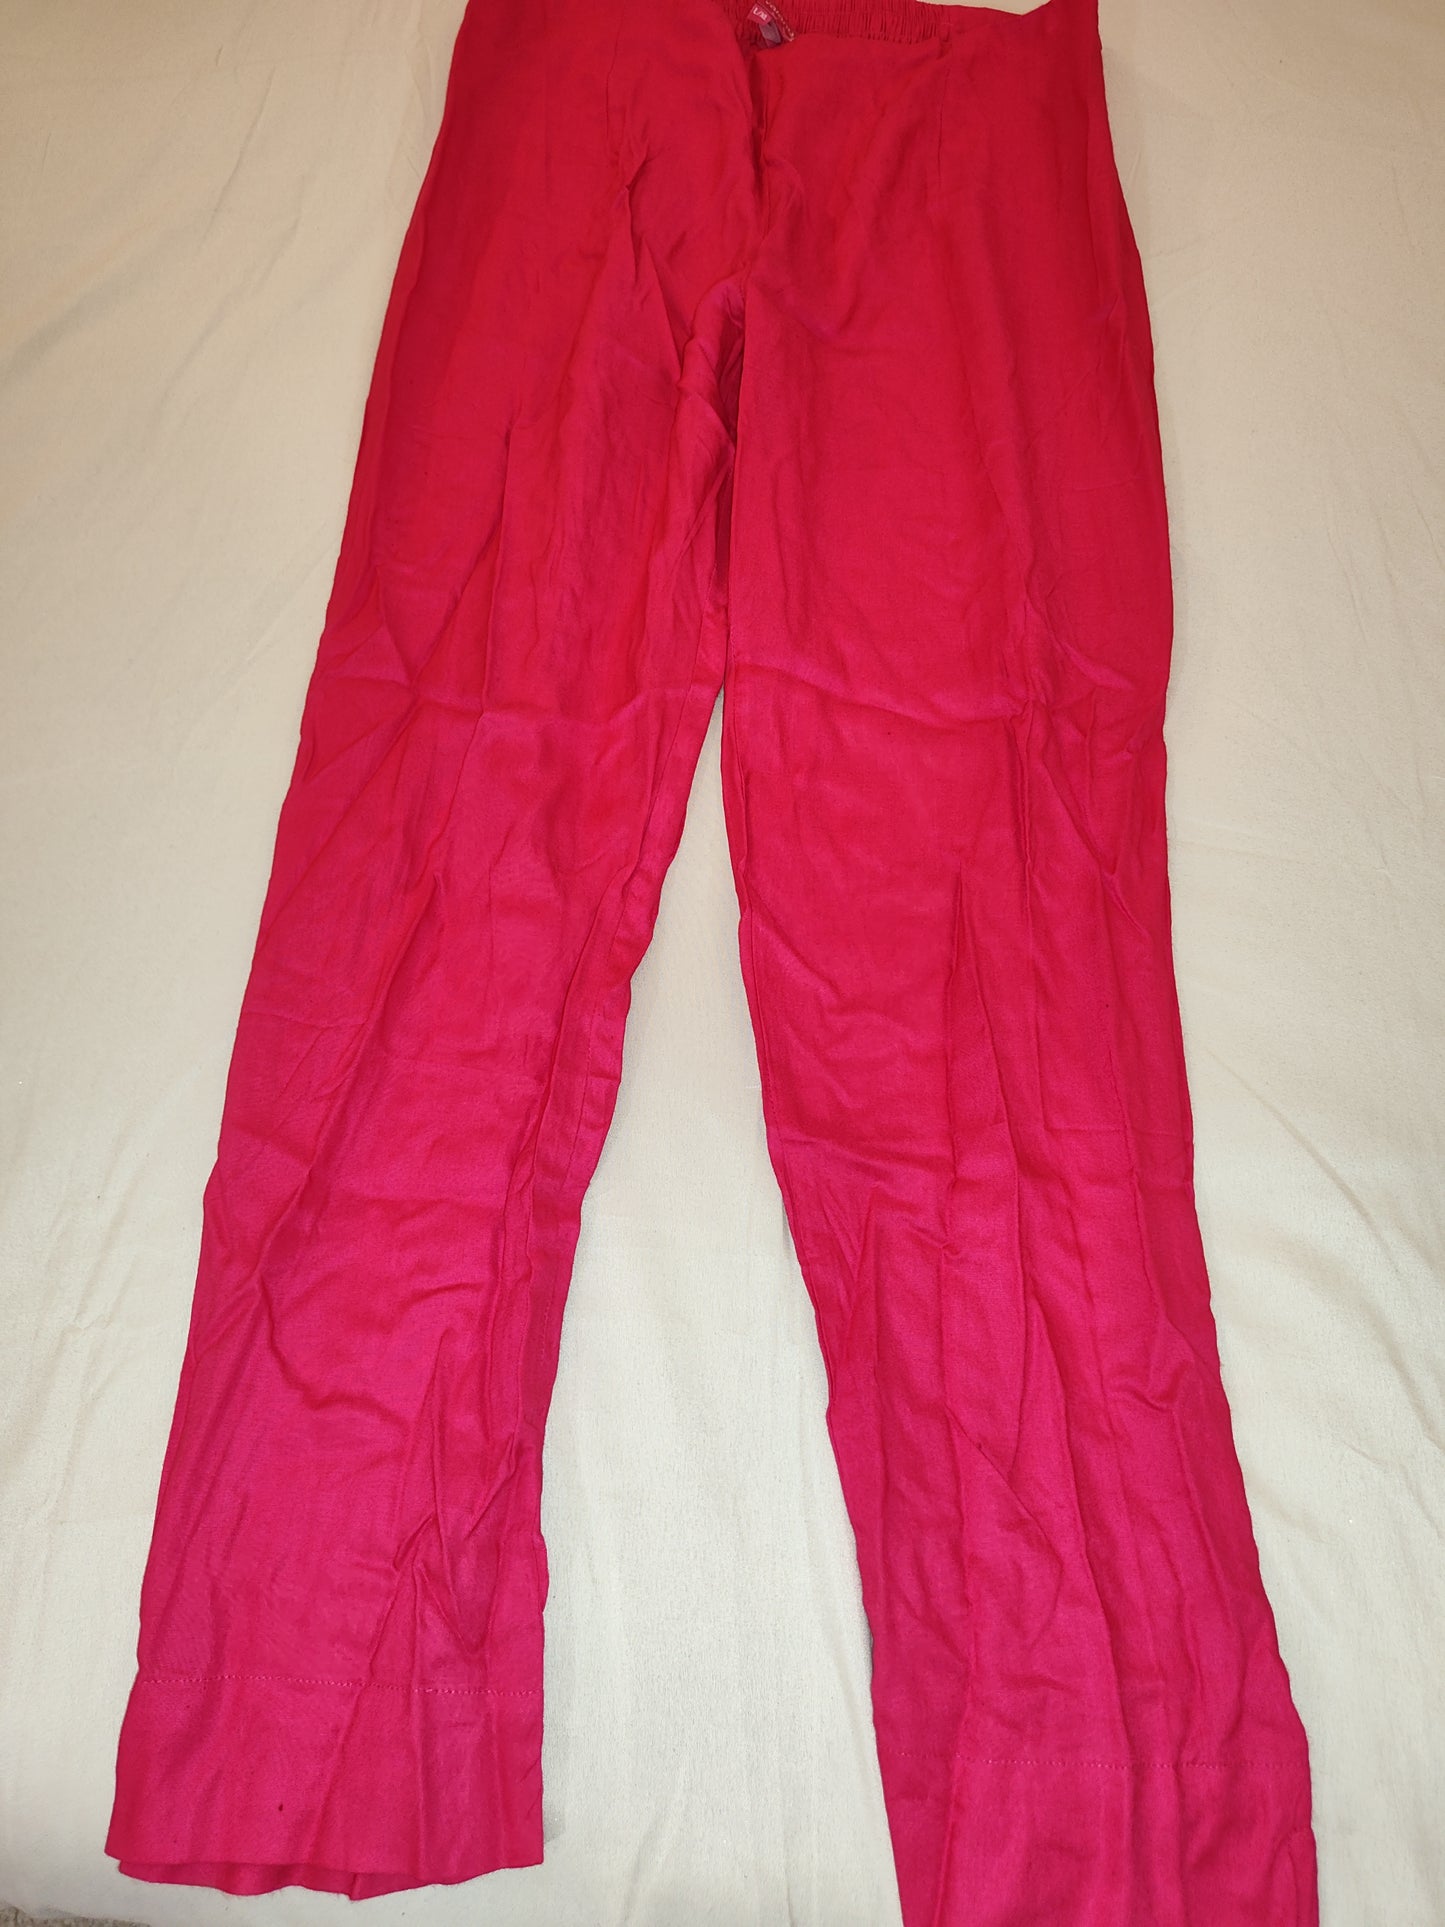 Attractive Pink Color Plain Cotton Palazzo Pants In USA